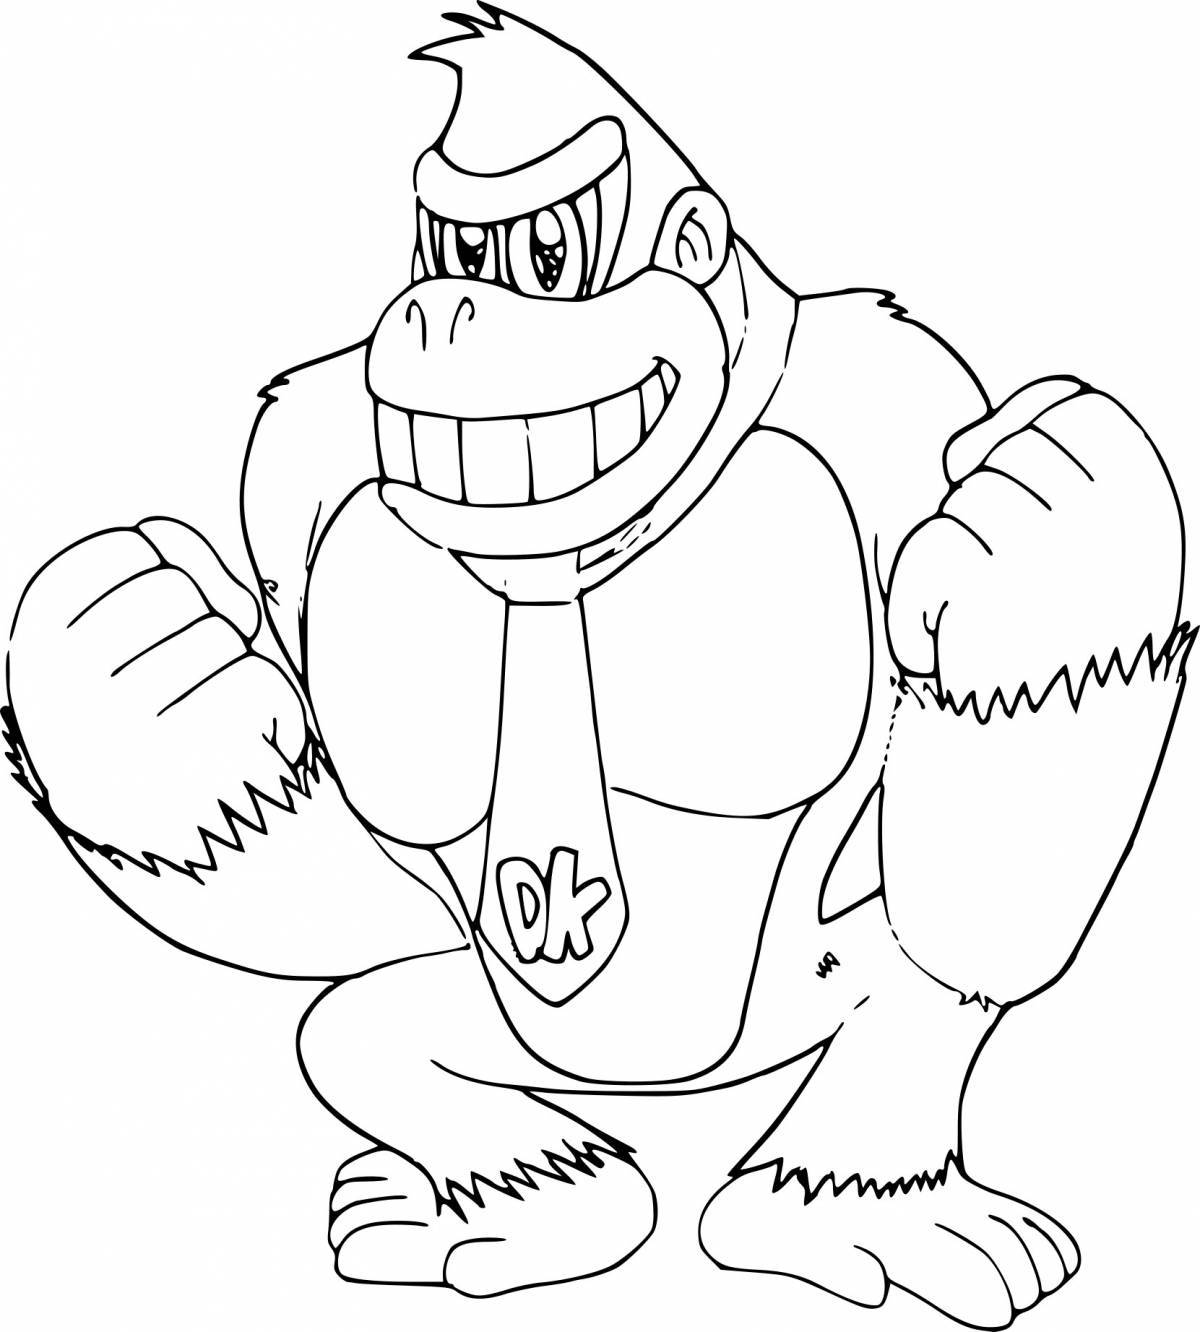 Courageous King Kong coloring page